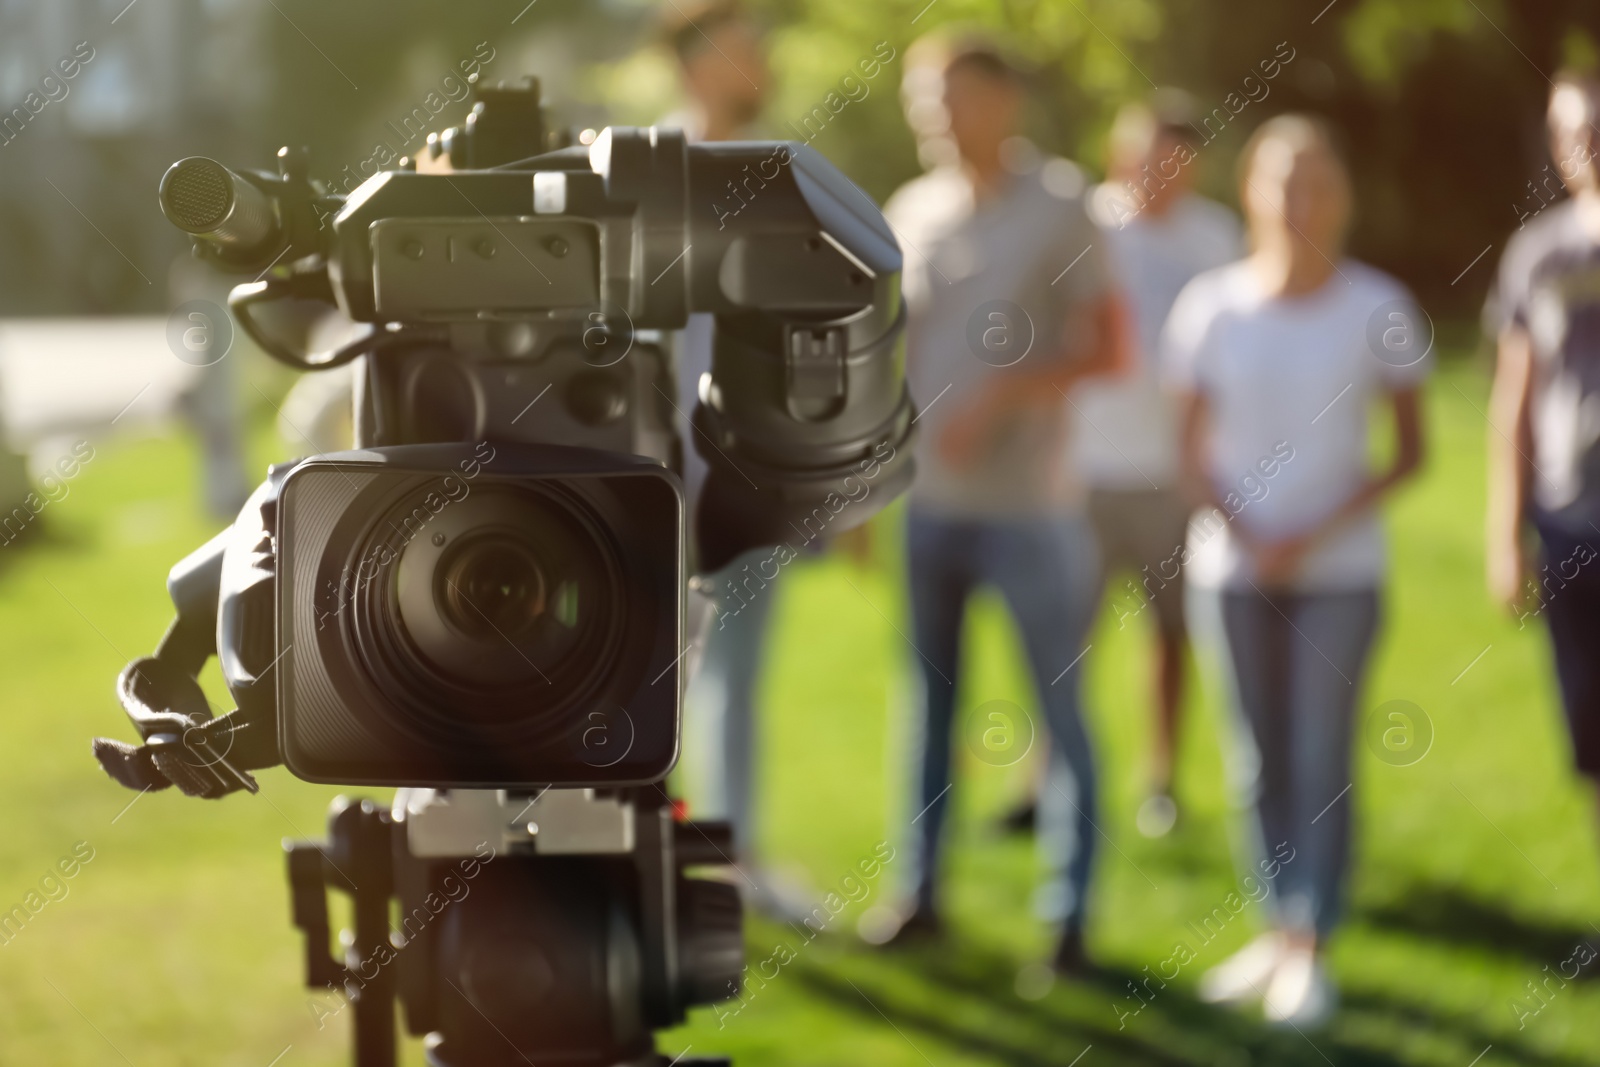 Photo of Professional video camera outdoors and group of people on background